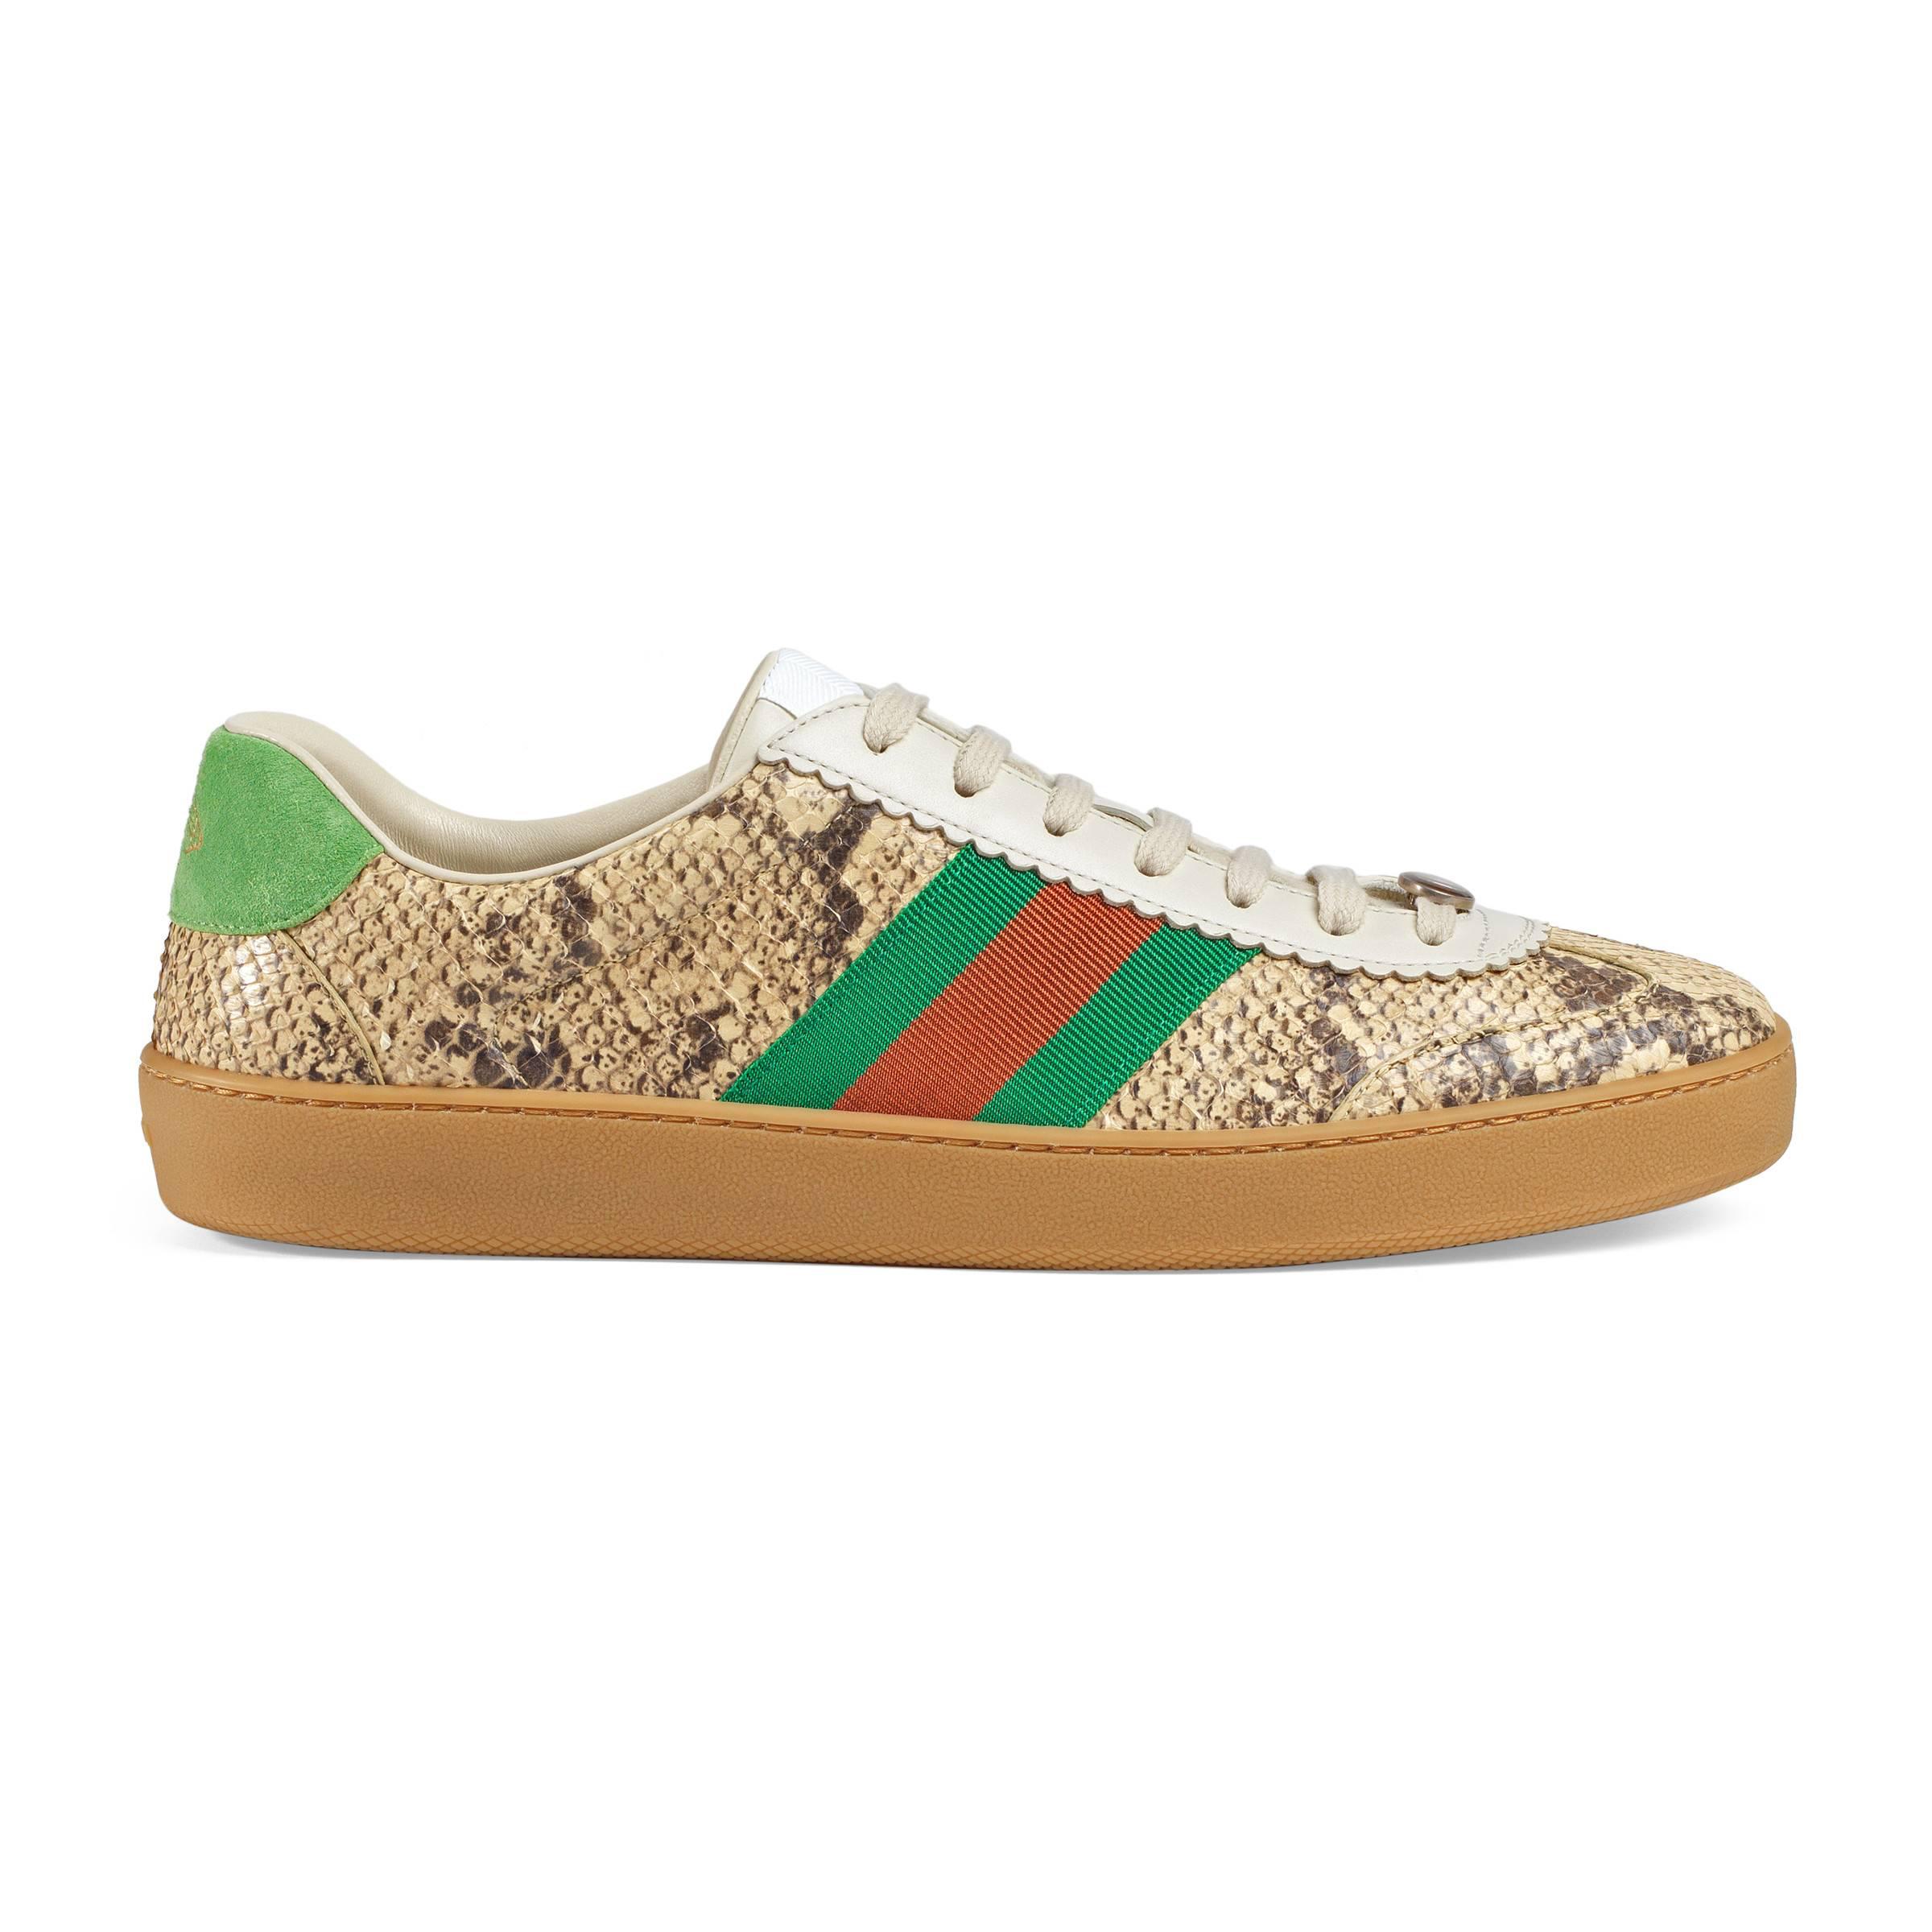 Lyst - Gucci G74 Python Sneaker With Web for Men